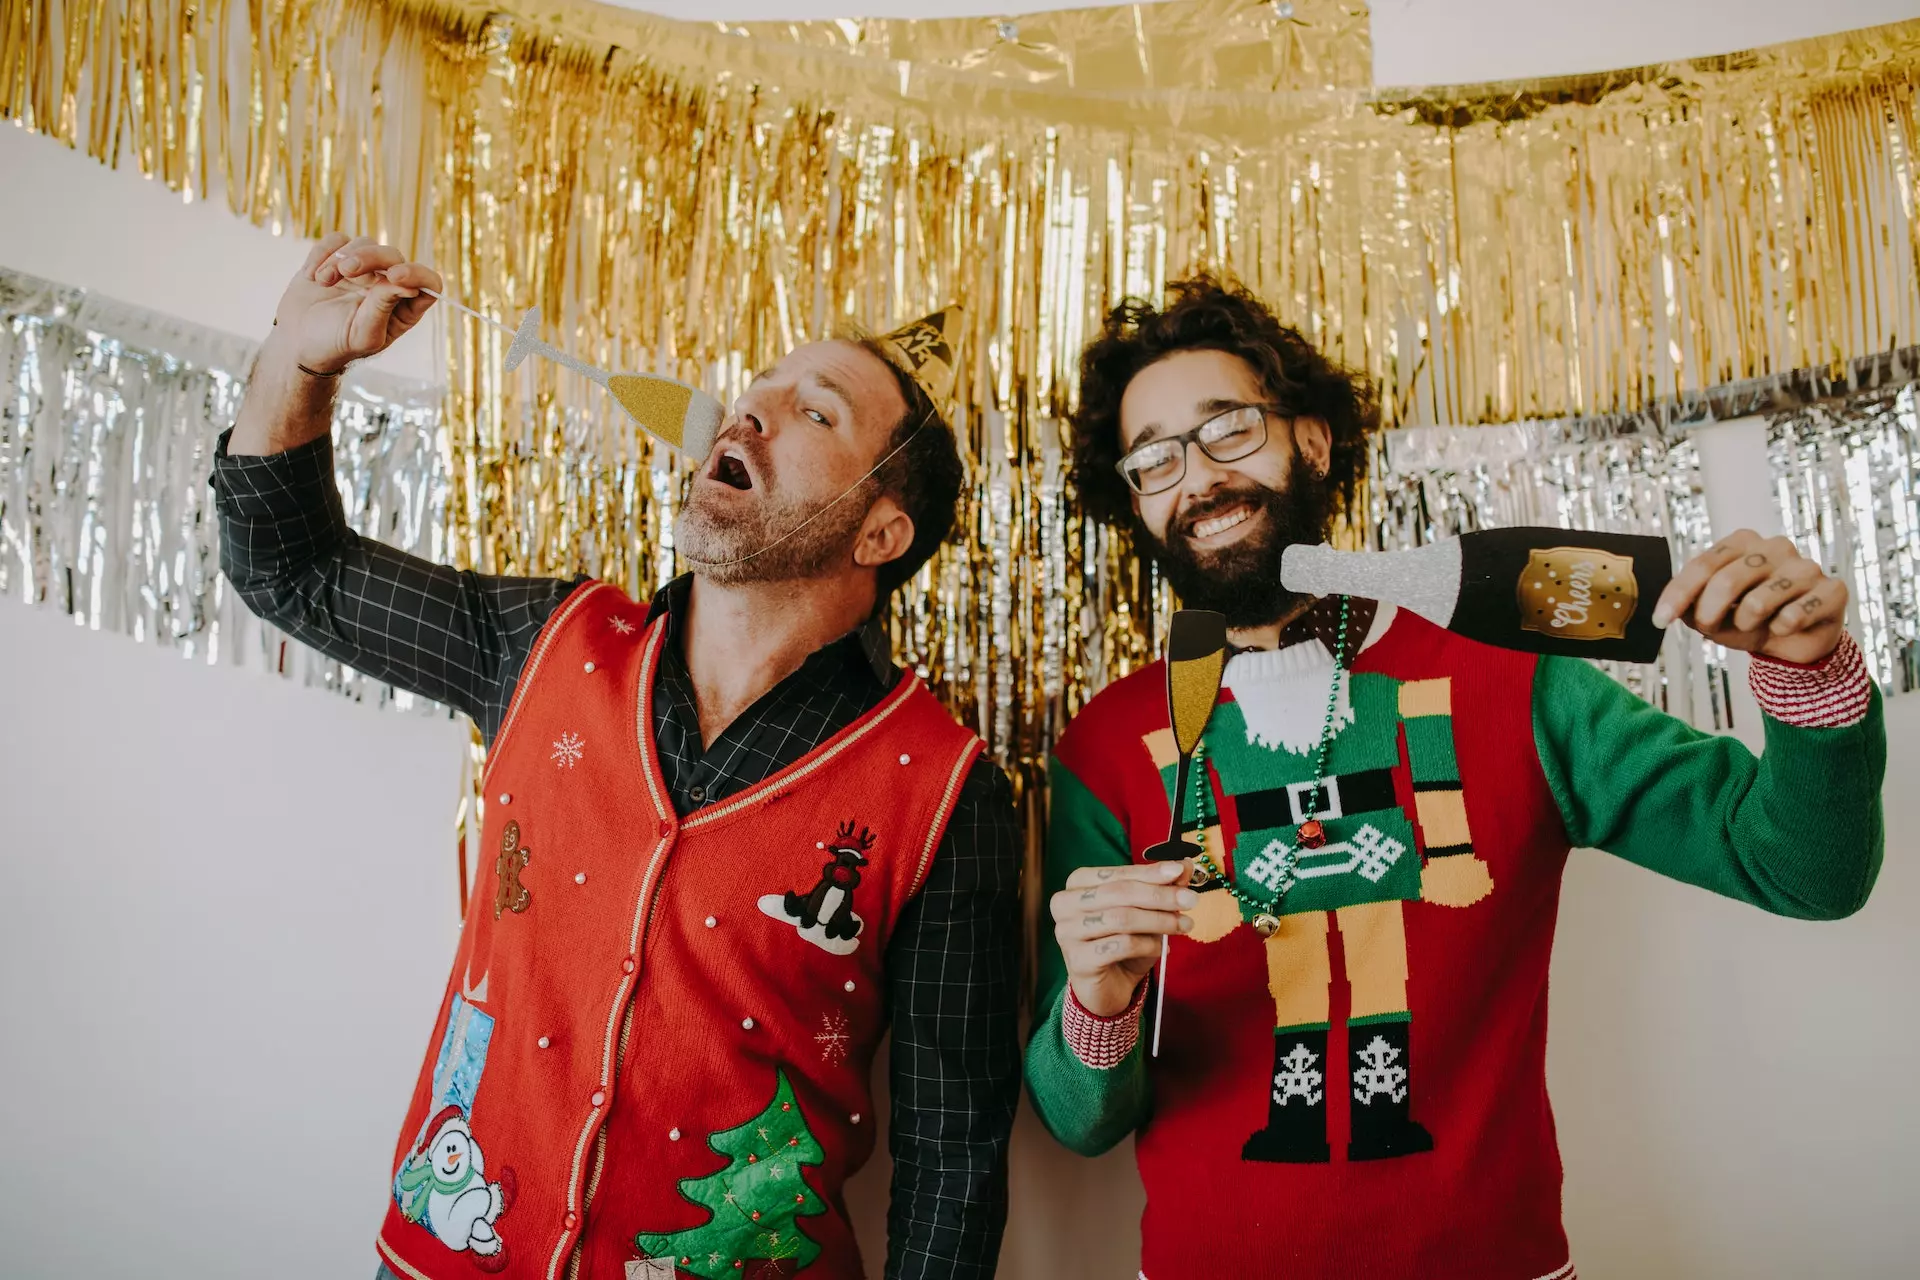 Two men posing in a Christmas-themed photo booth